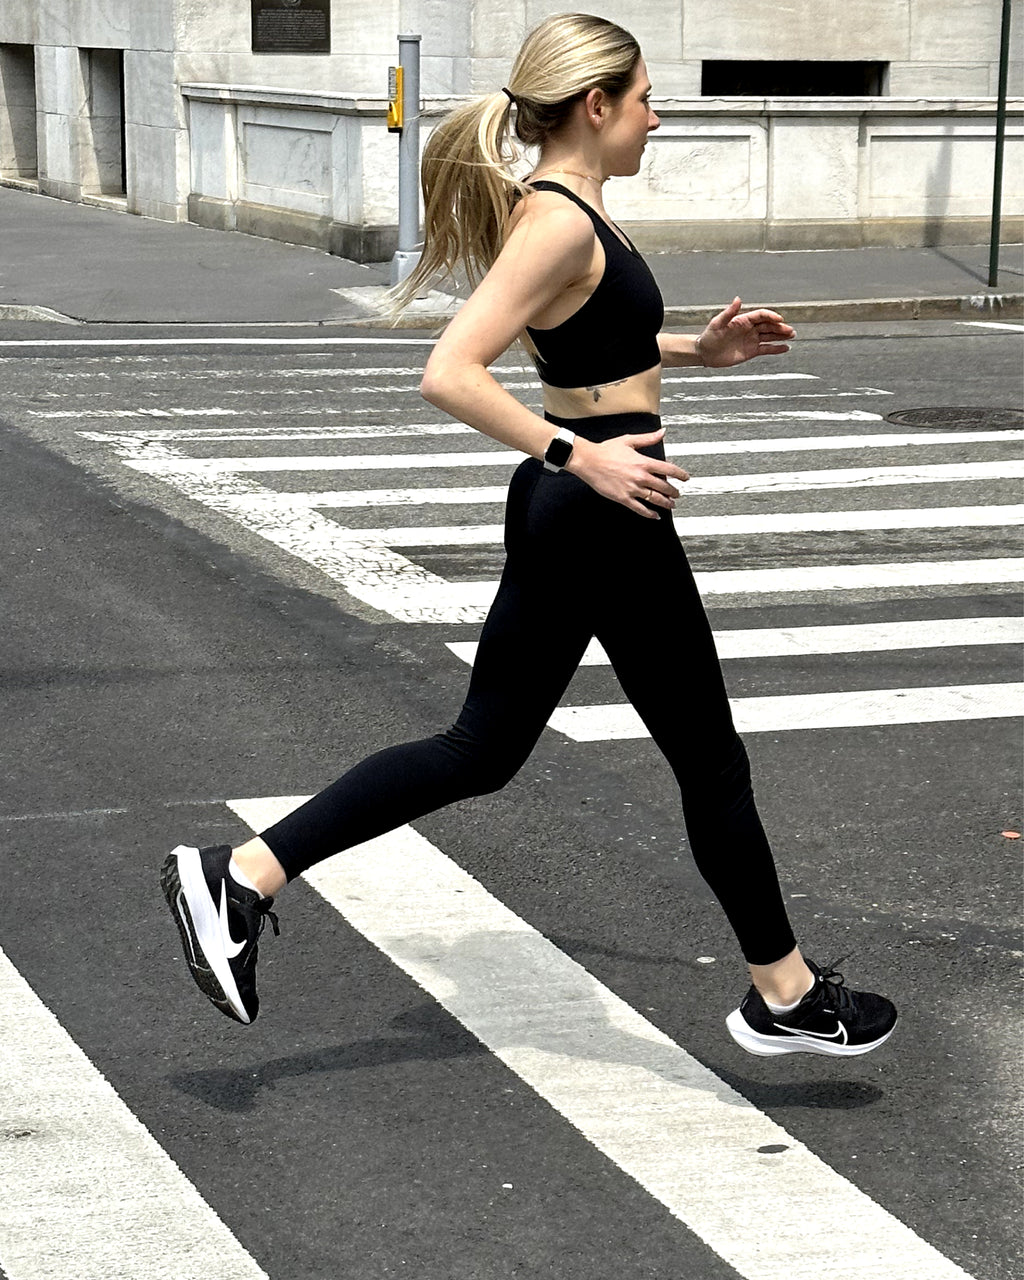 Bandier Senior Ecom Manager Kristen wears the Nike Pegasus 40 on her run in the city